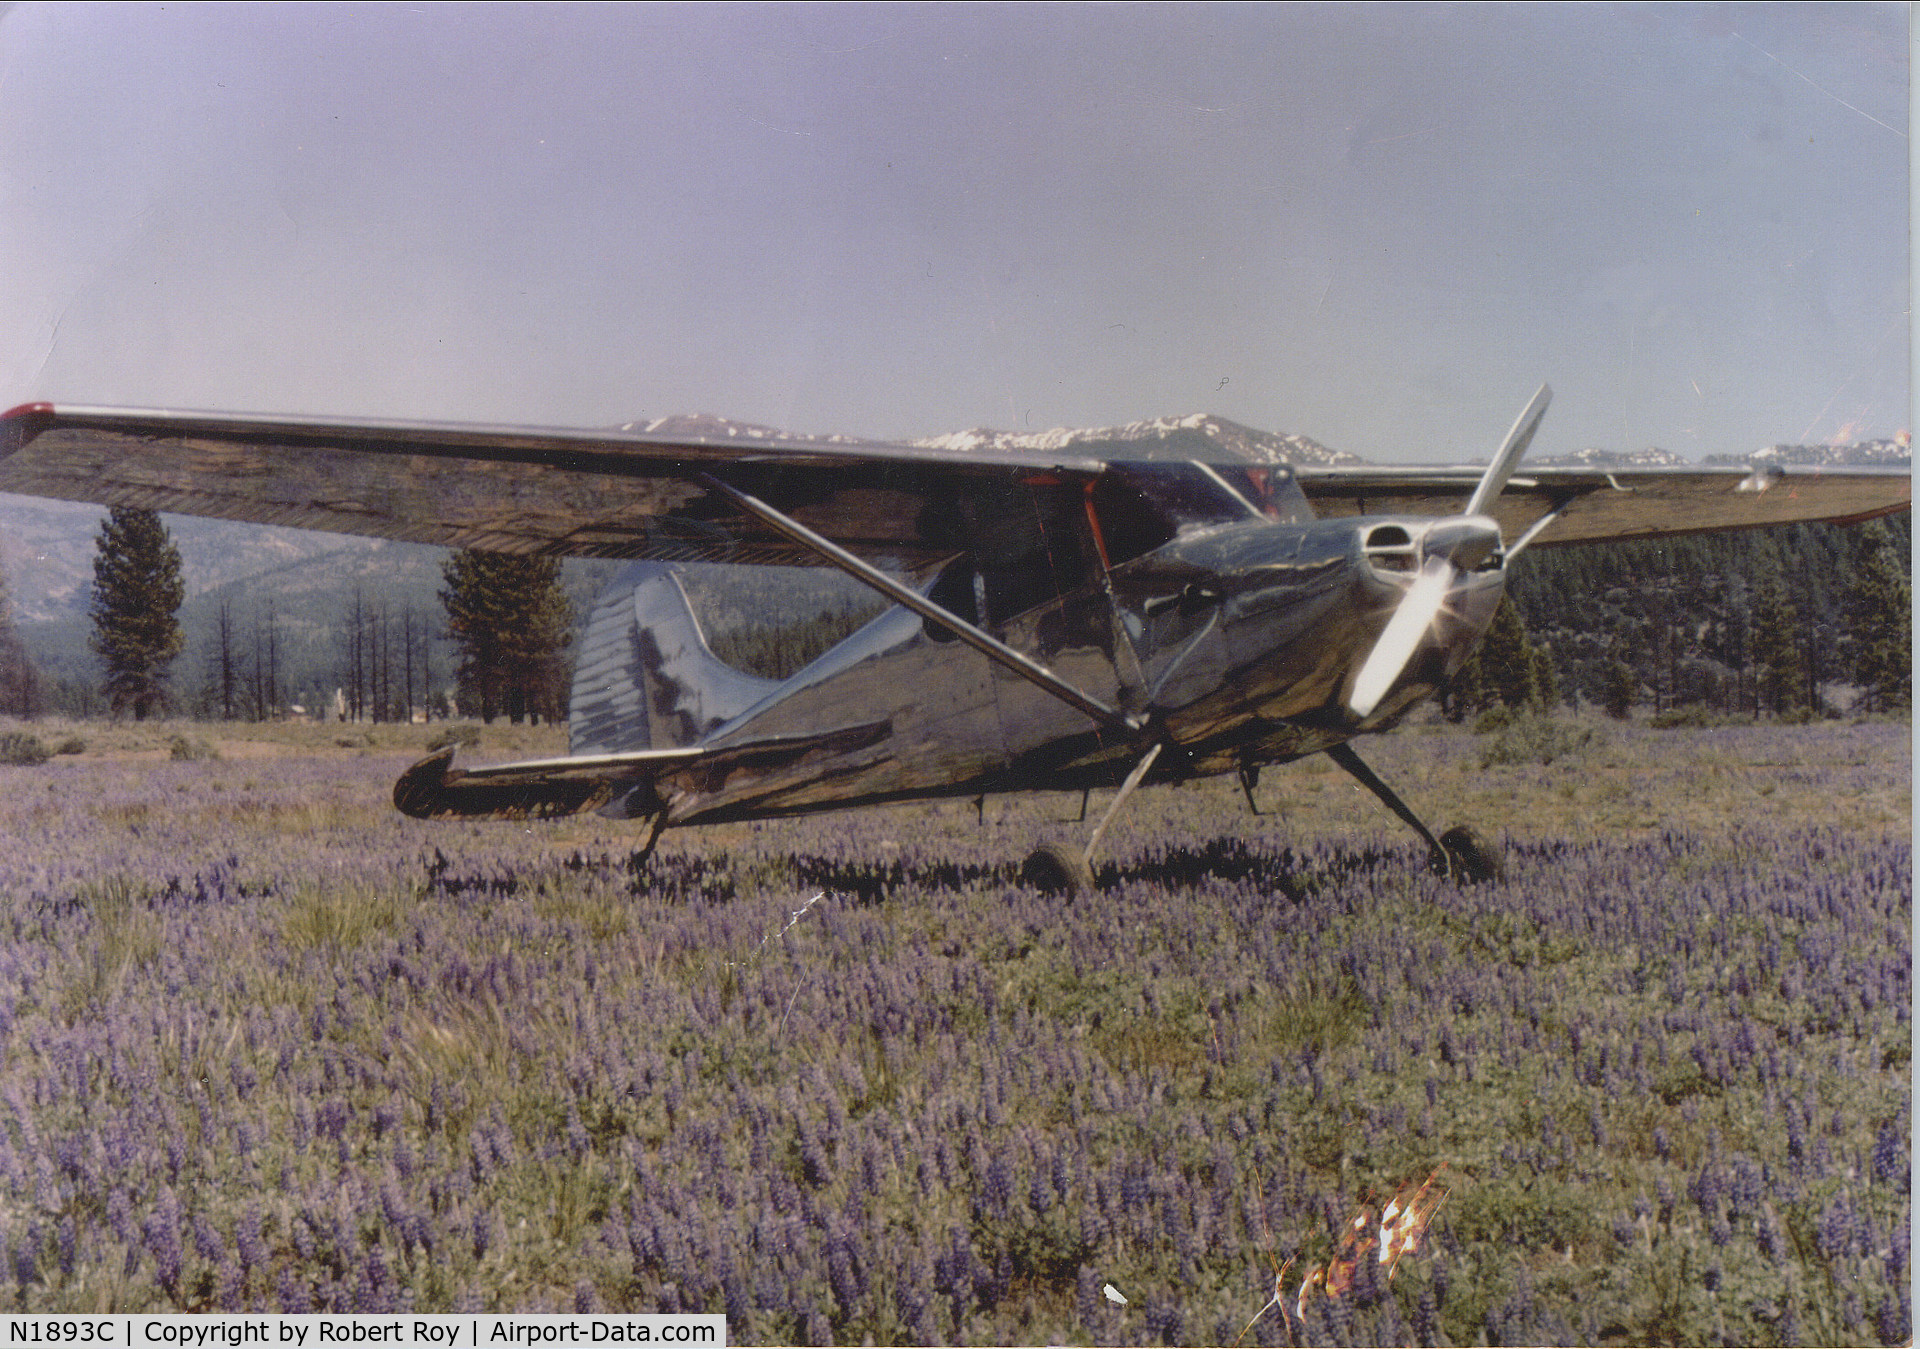 N1893C, 1953 Cessna 170B C/N 26037, Our Cessna taken in Truckee CA on the old Truckee airport in a field of flowers